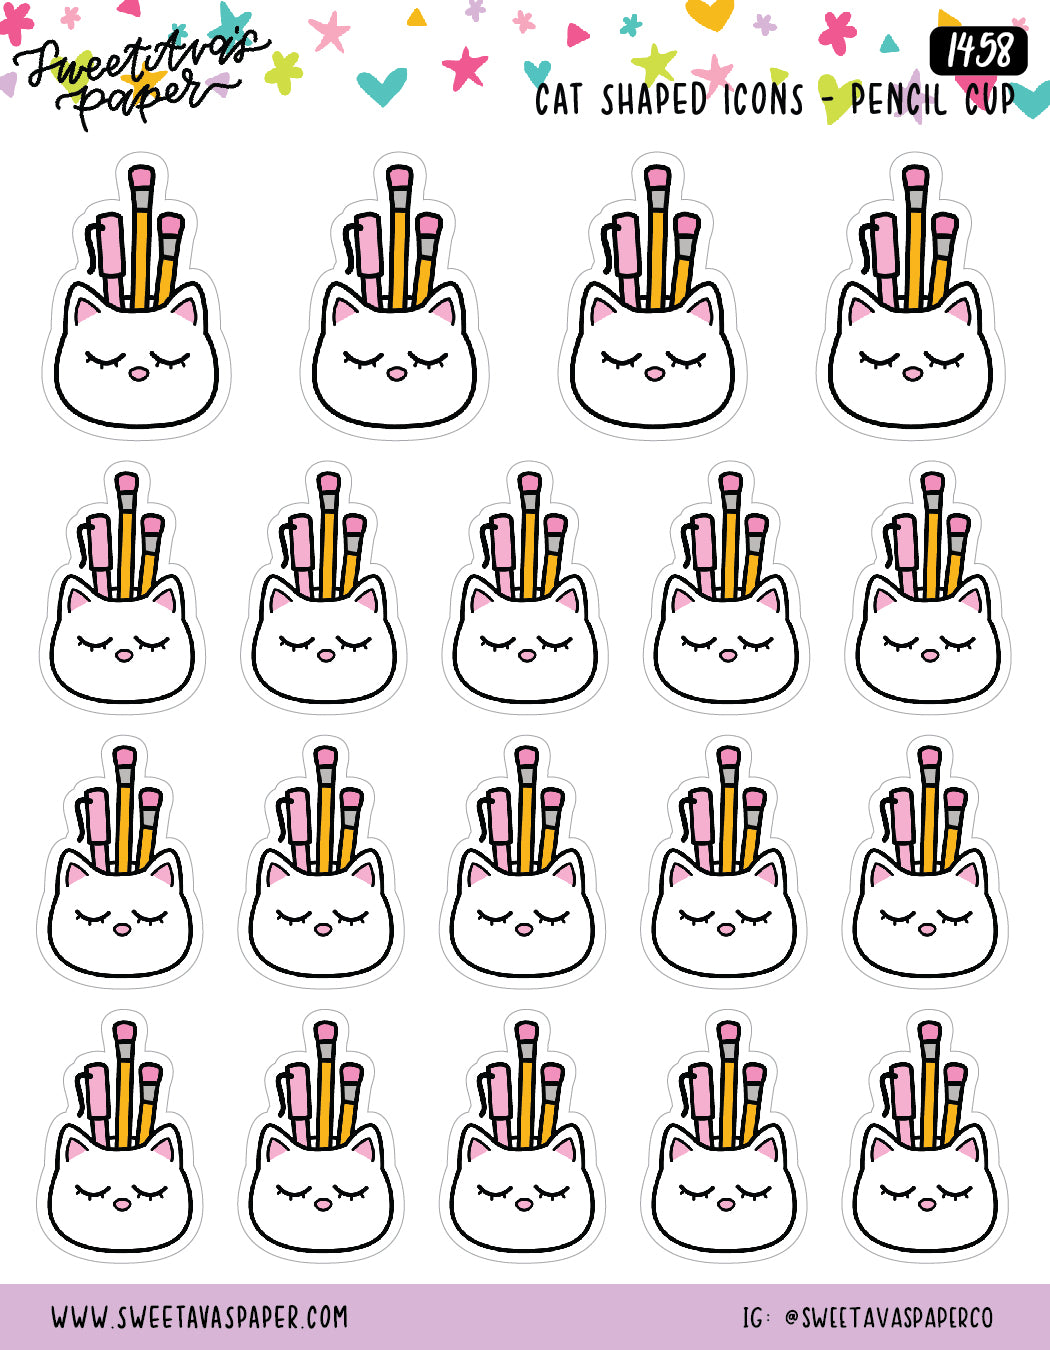 Cat Pencil Cup Planner Stickers - Cat Shaped Icons - [1458]